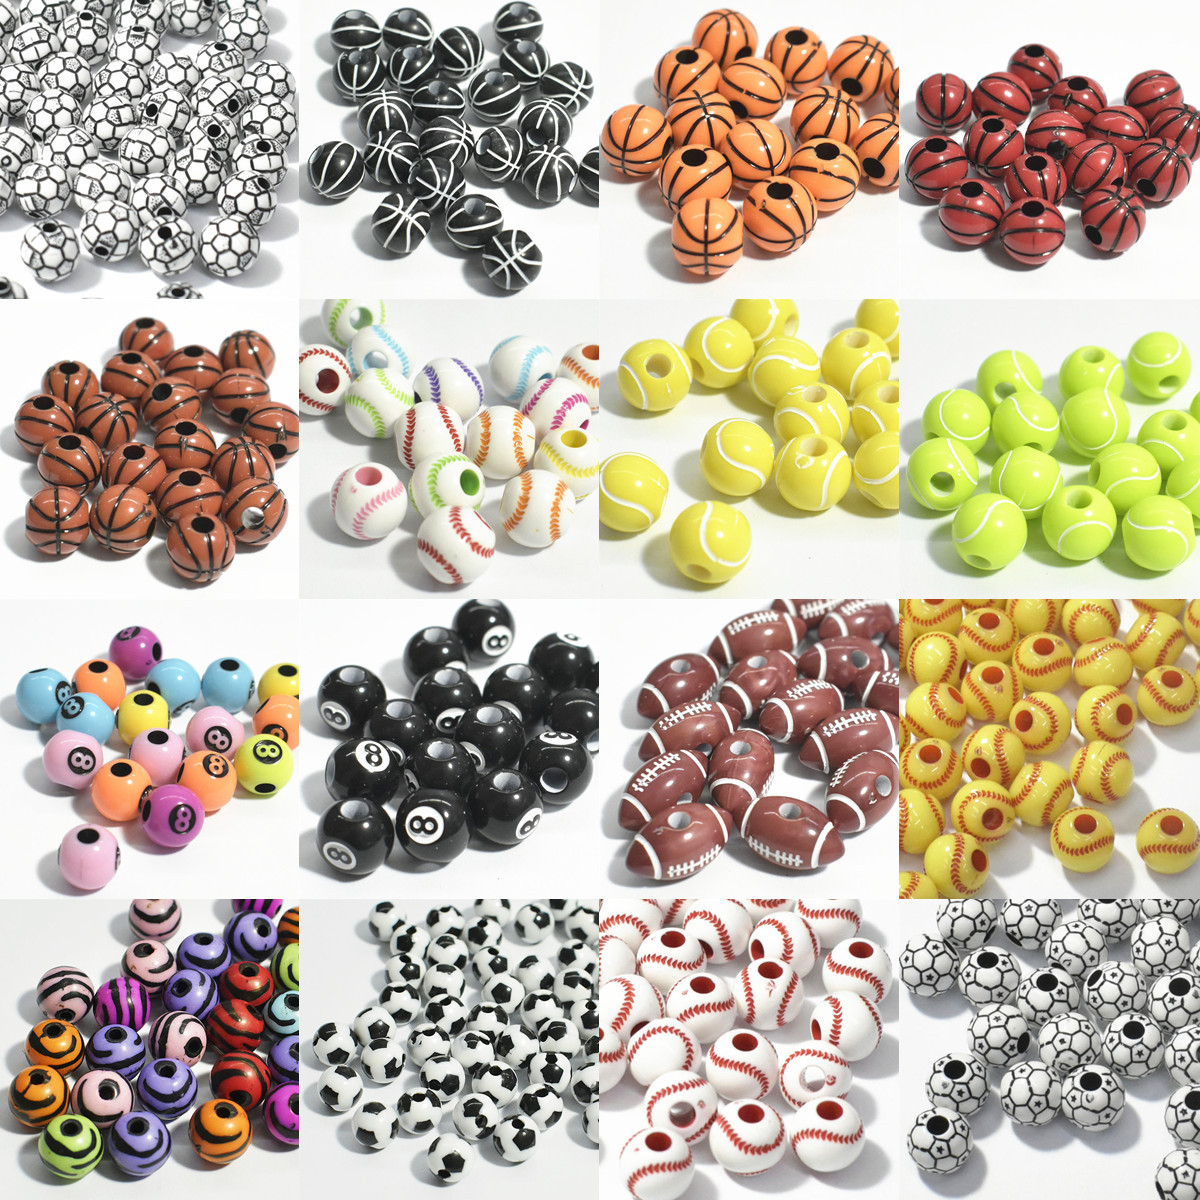 50 PCs Ornament Accessories Children's Handmade Bead Material Acrylic Baseball Basketball Football Tennis Scattered Beads Batch Boxed